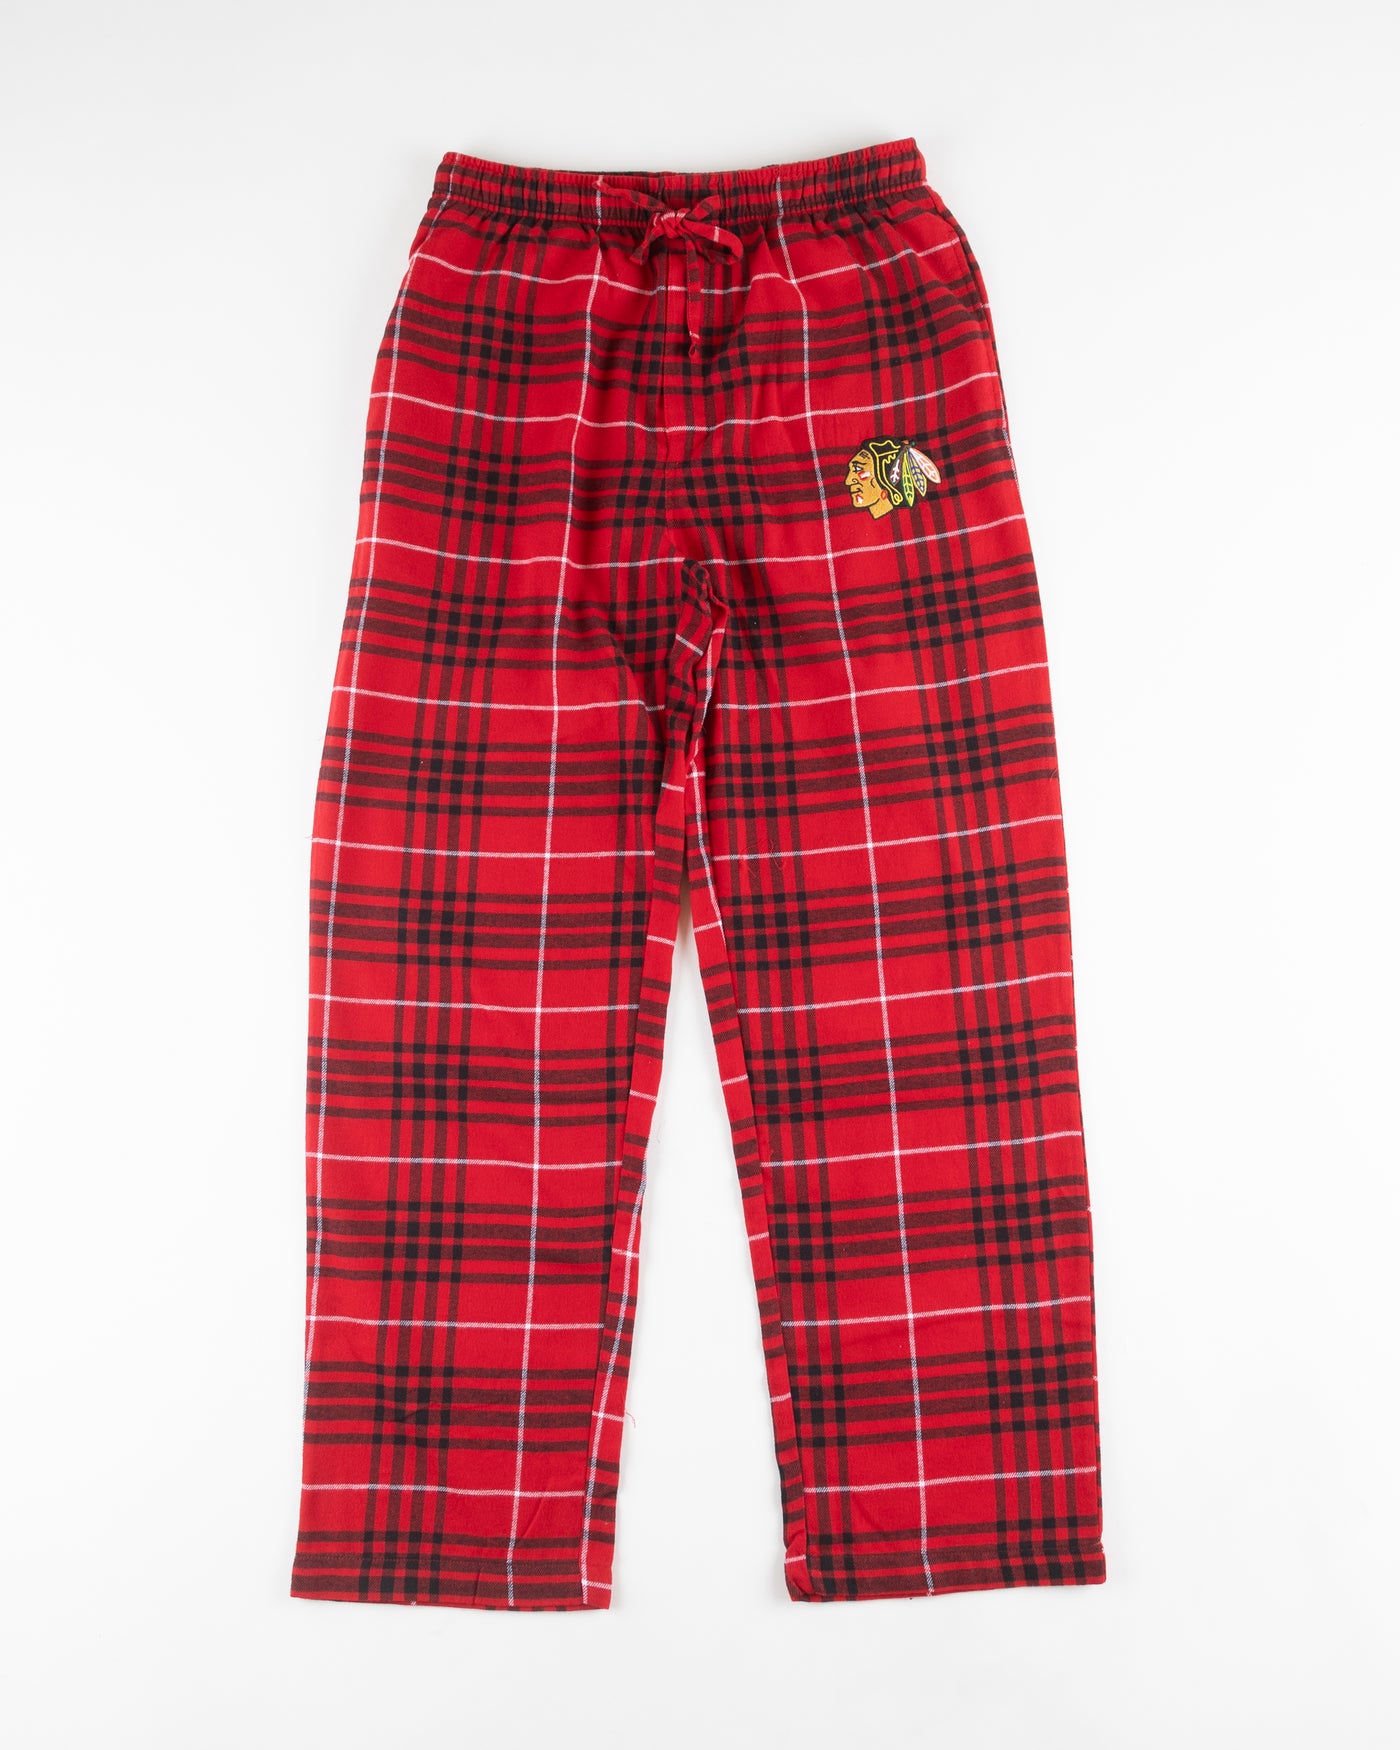 red flannel pajama pants with tonal Chicago Blackhawks primary logo on left leg - front lay flat